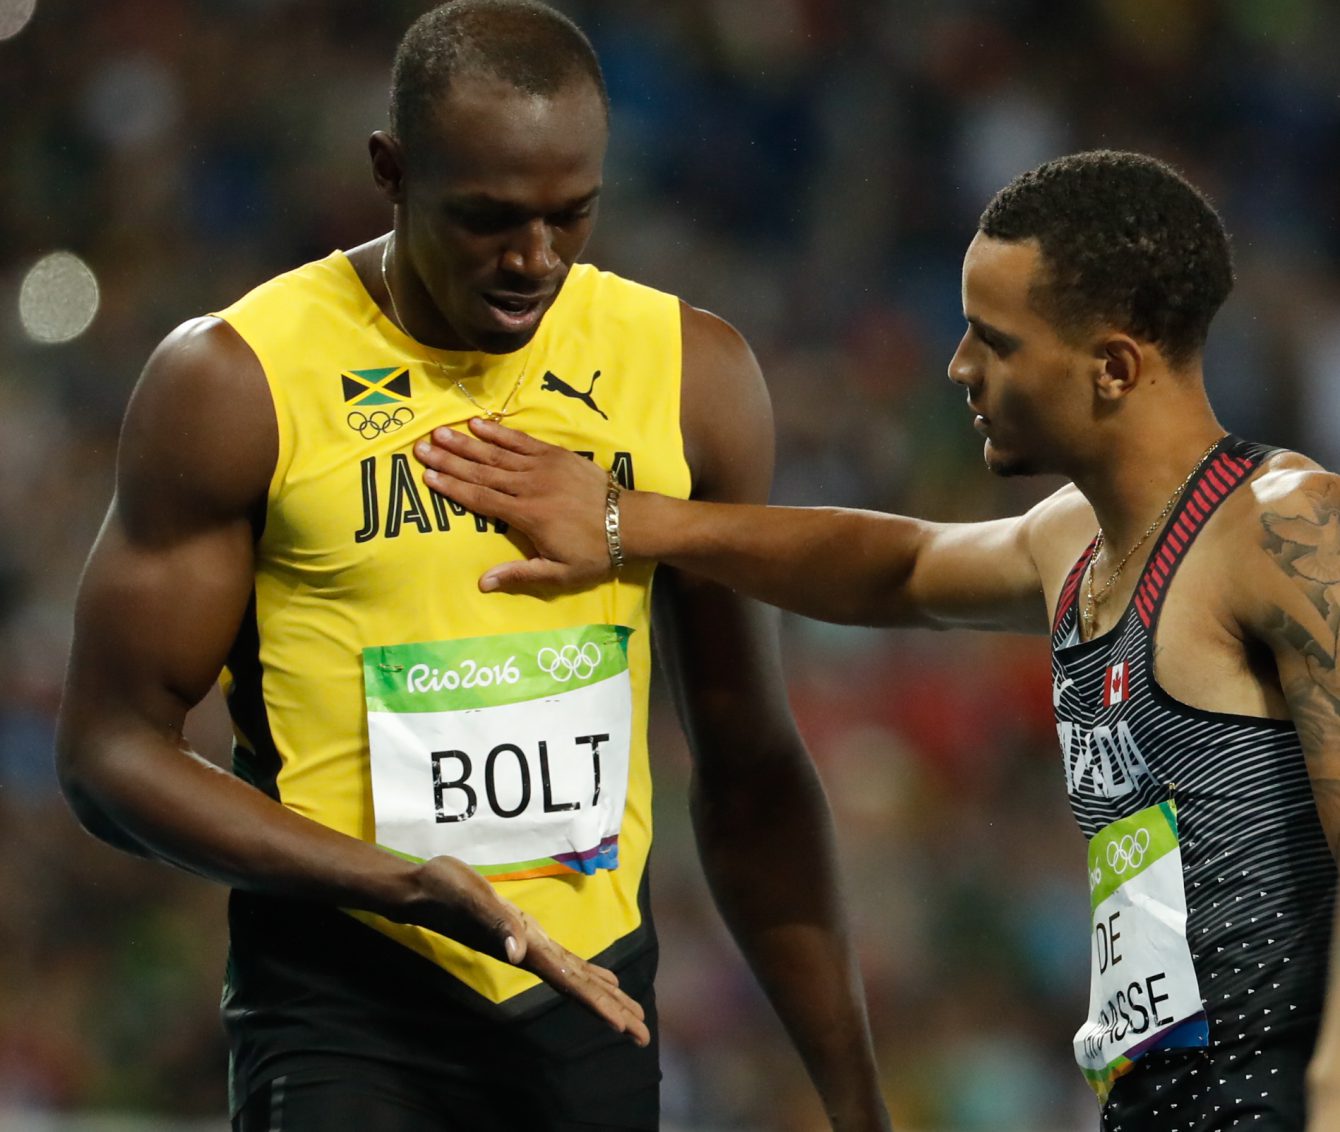 Andre De Grasse who finished second, congratulates Usain Bolt on his gold medal win in Rio on August 18, 2016. (photo/ Mark Blinch)